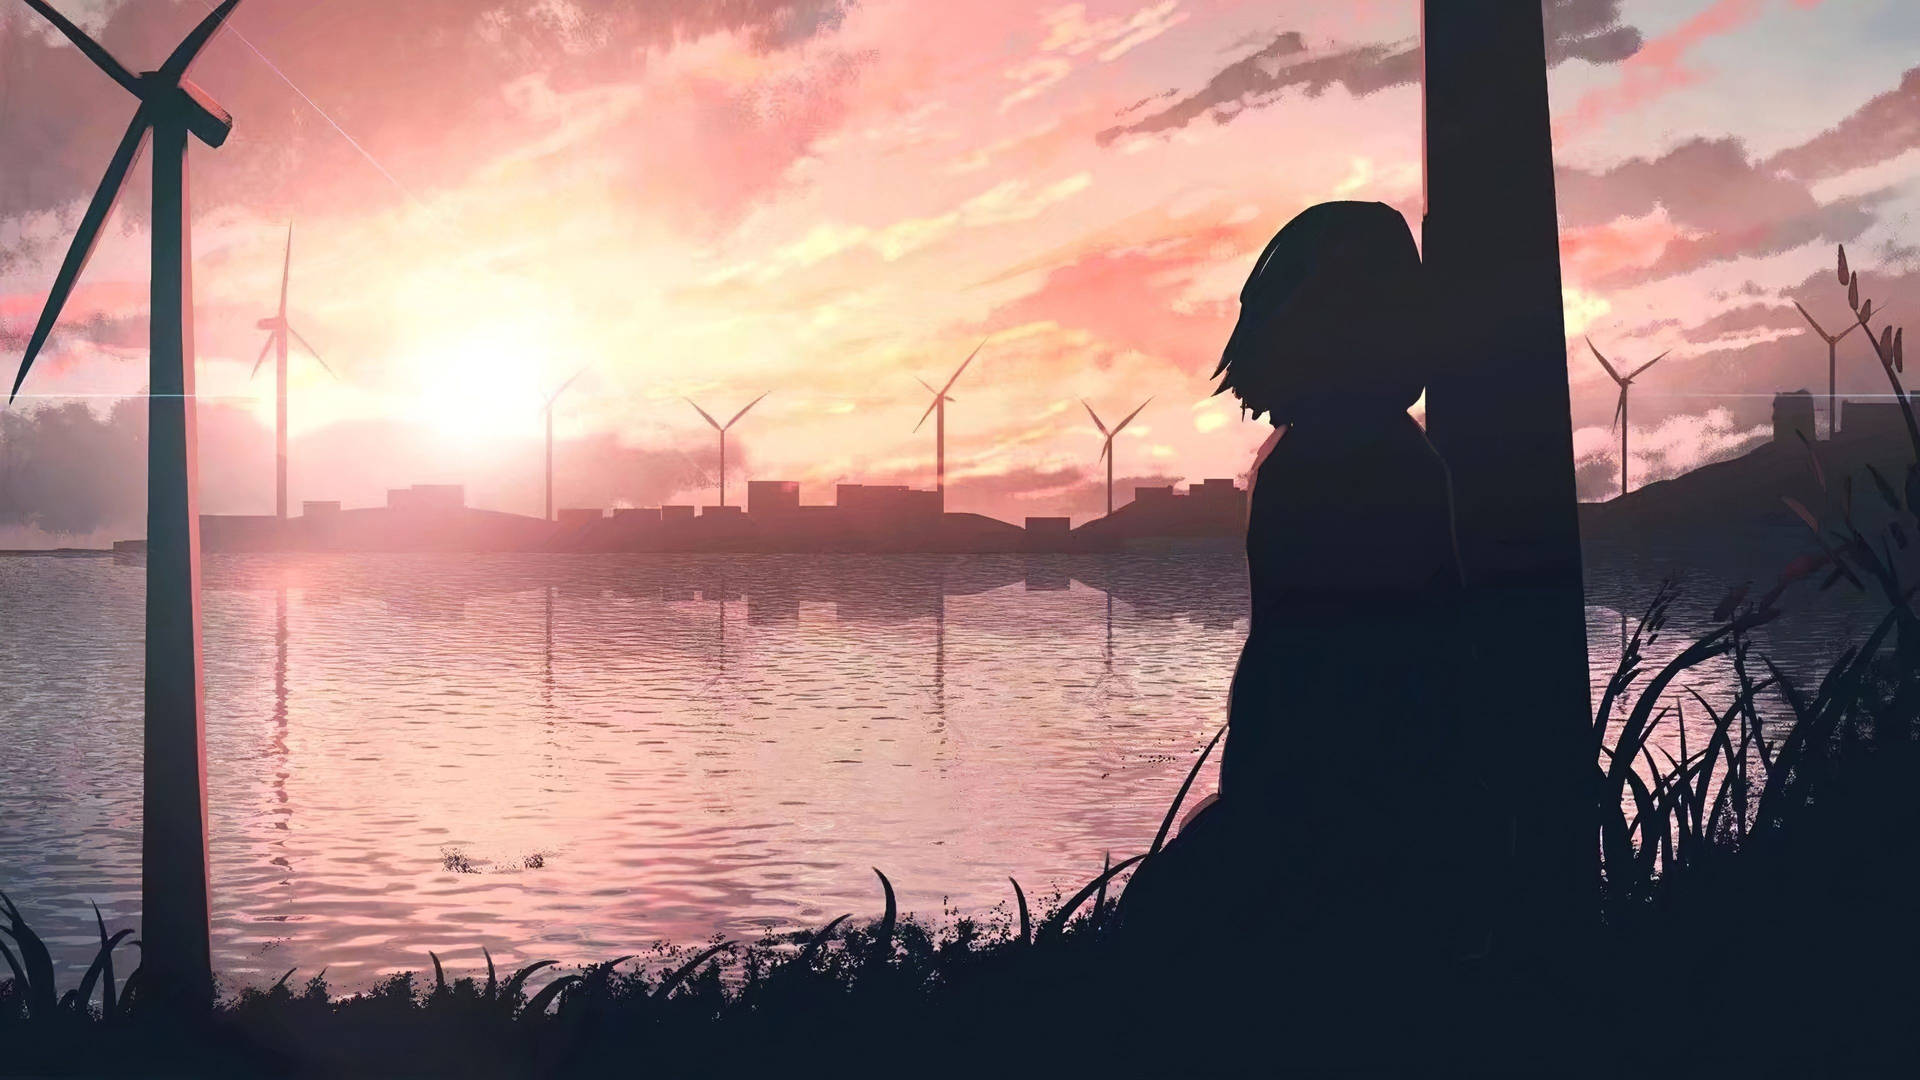 Anime Girl Sad Alone By Lake With Windmills Picture